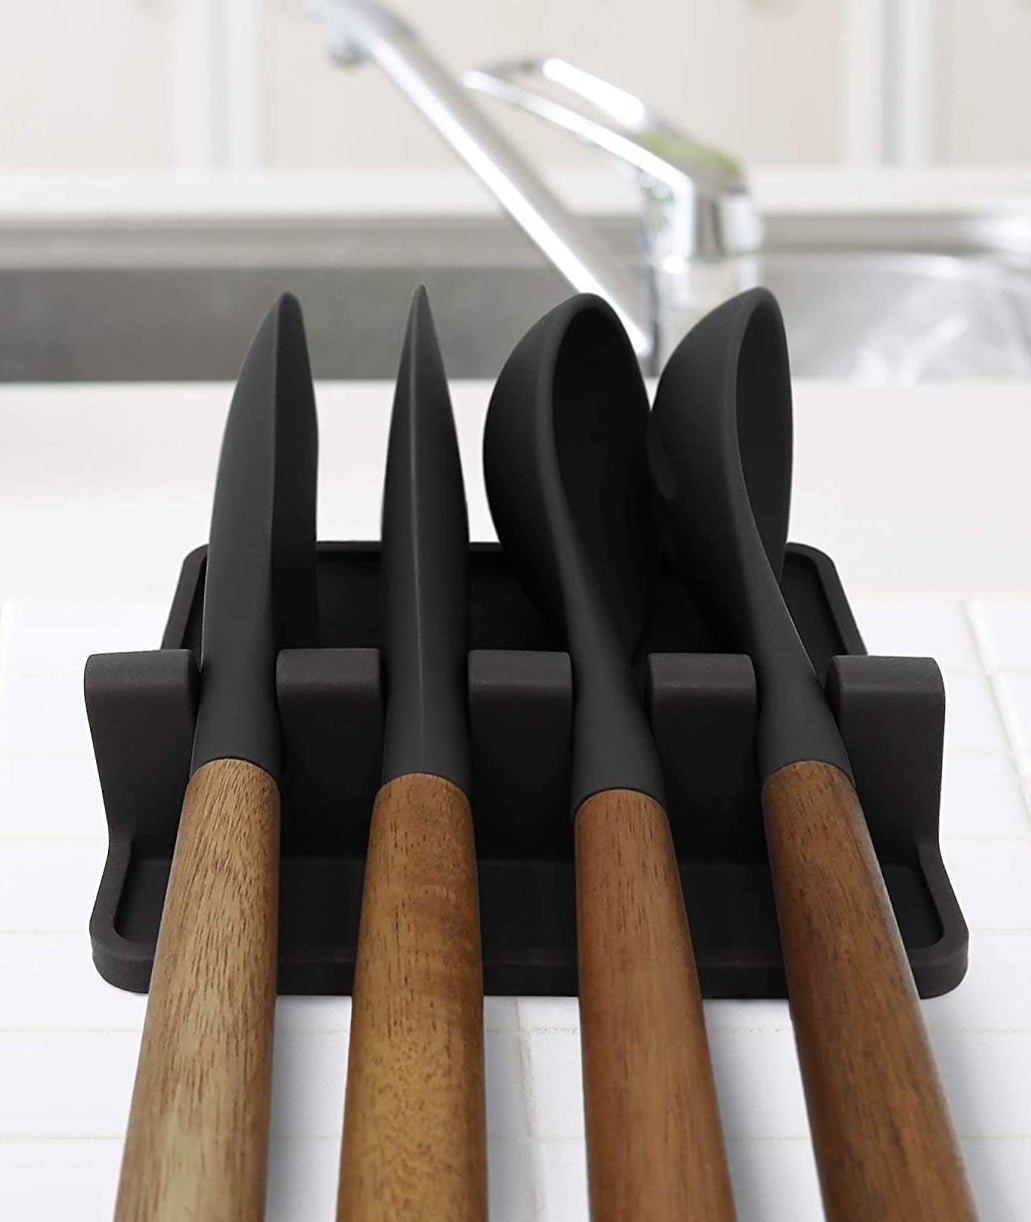 Four cooking utensils sitting in the spoon rest